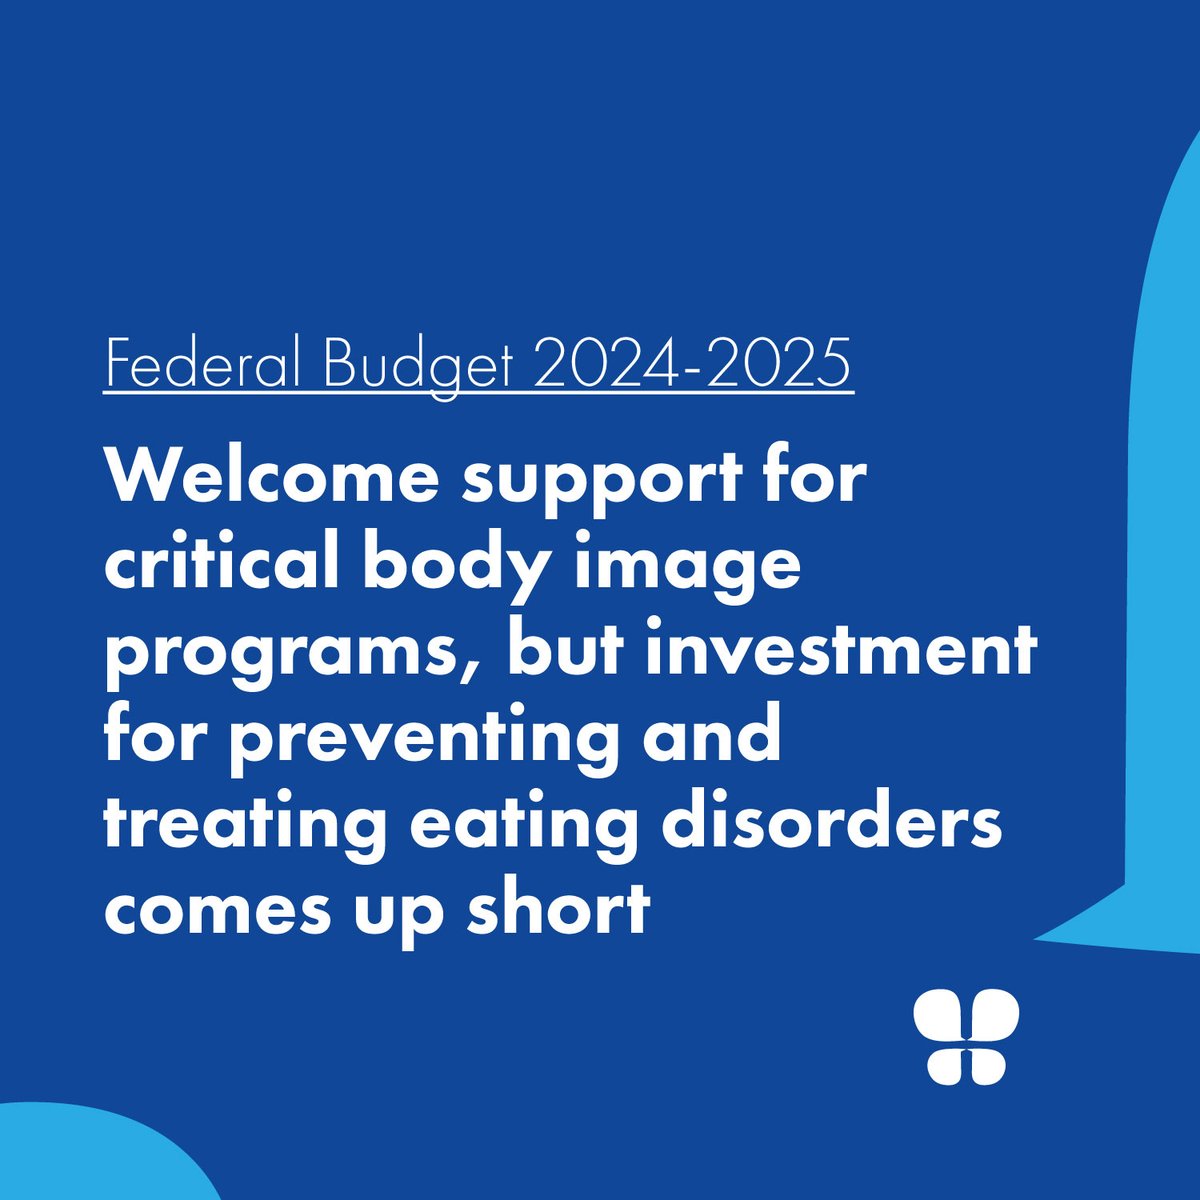 Butterfly’s vision is that ‘all people in Australia can live free of eating disorders and negative body image.’ As a not-for-profit charity, we cannot do this without significant government investment. Read our response to the Federal Budget 2024-2025⬇️ butterfly.org.au/news/welcome-s…